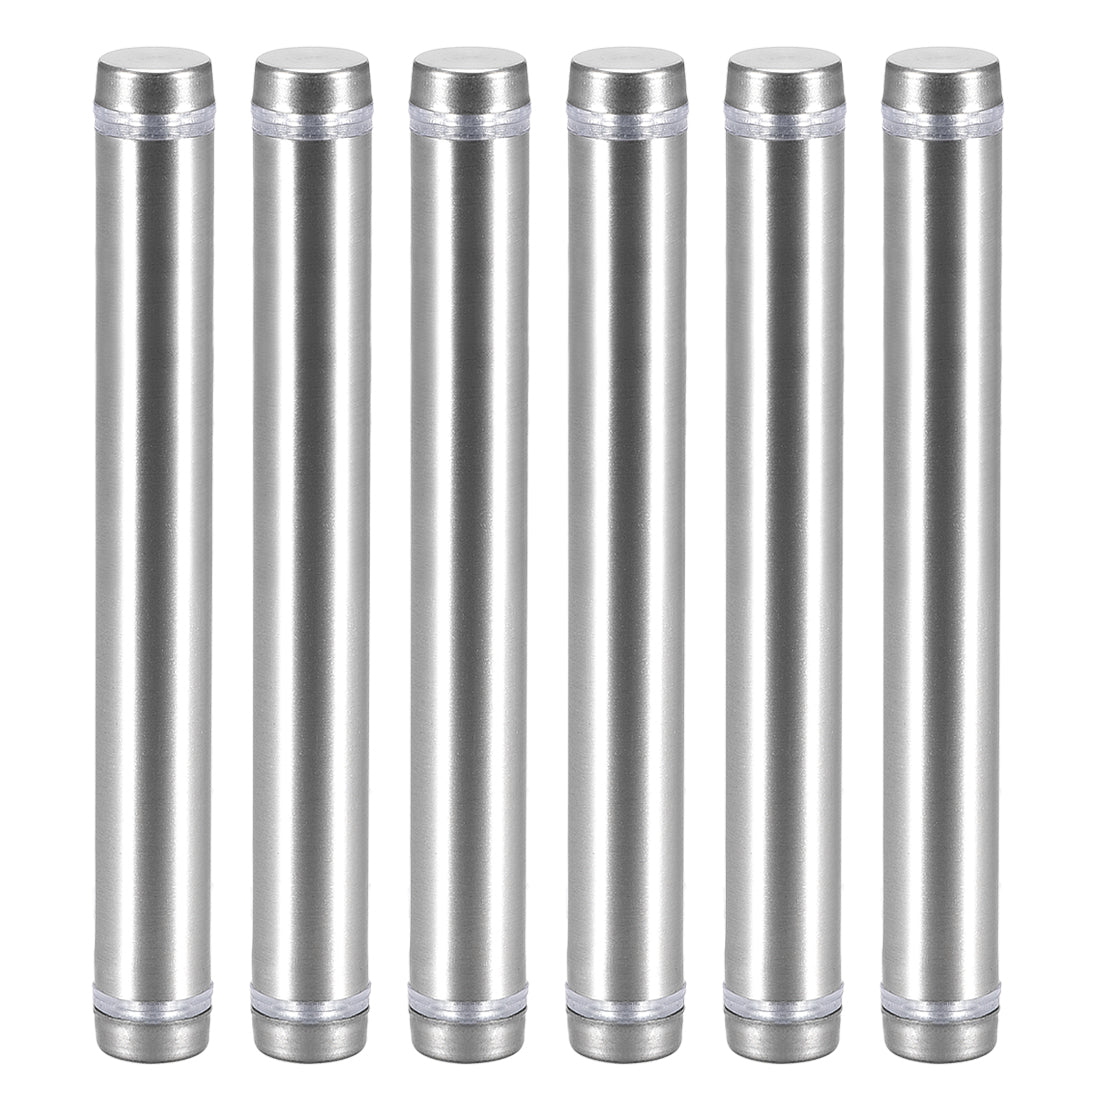 uxcell Uxcell Glass Standoff Double Head Stainless Steel Standoff Holder 12mm x 104mm 6 Pcs